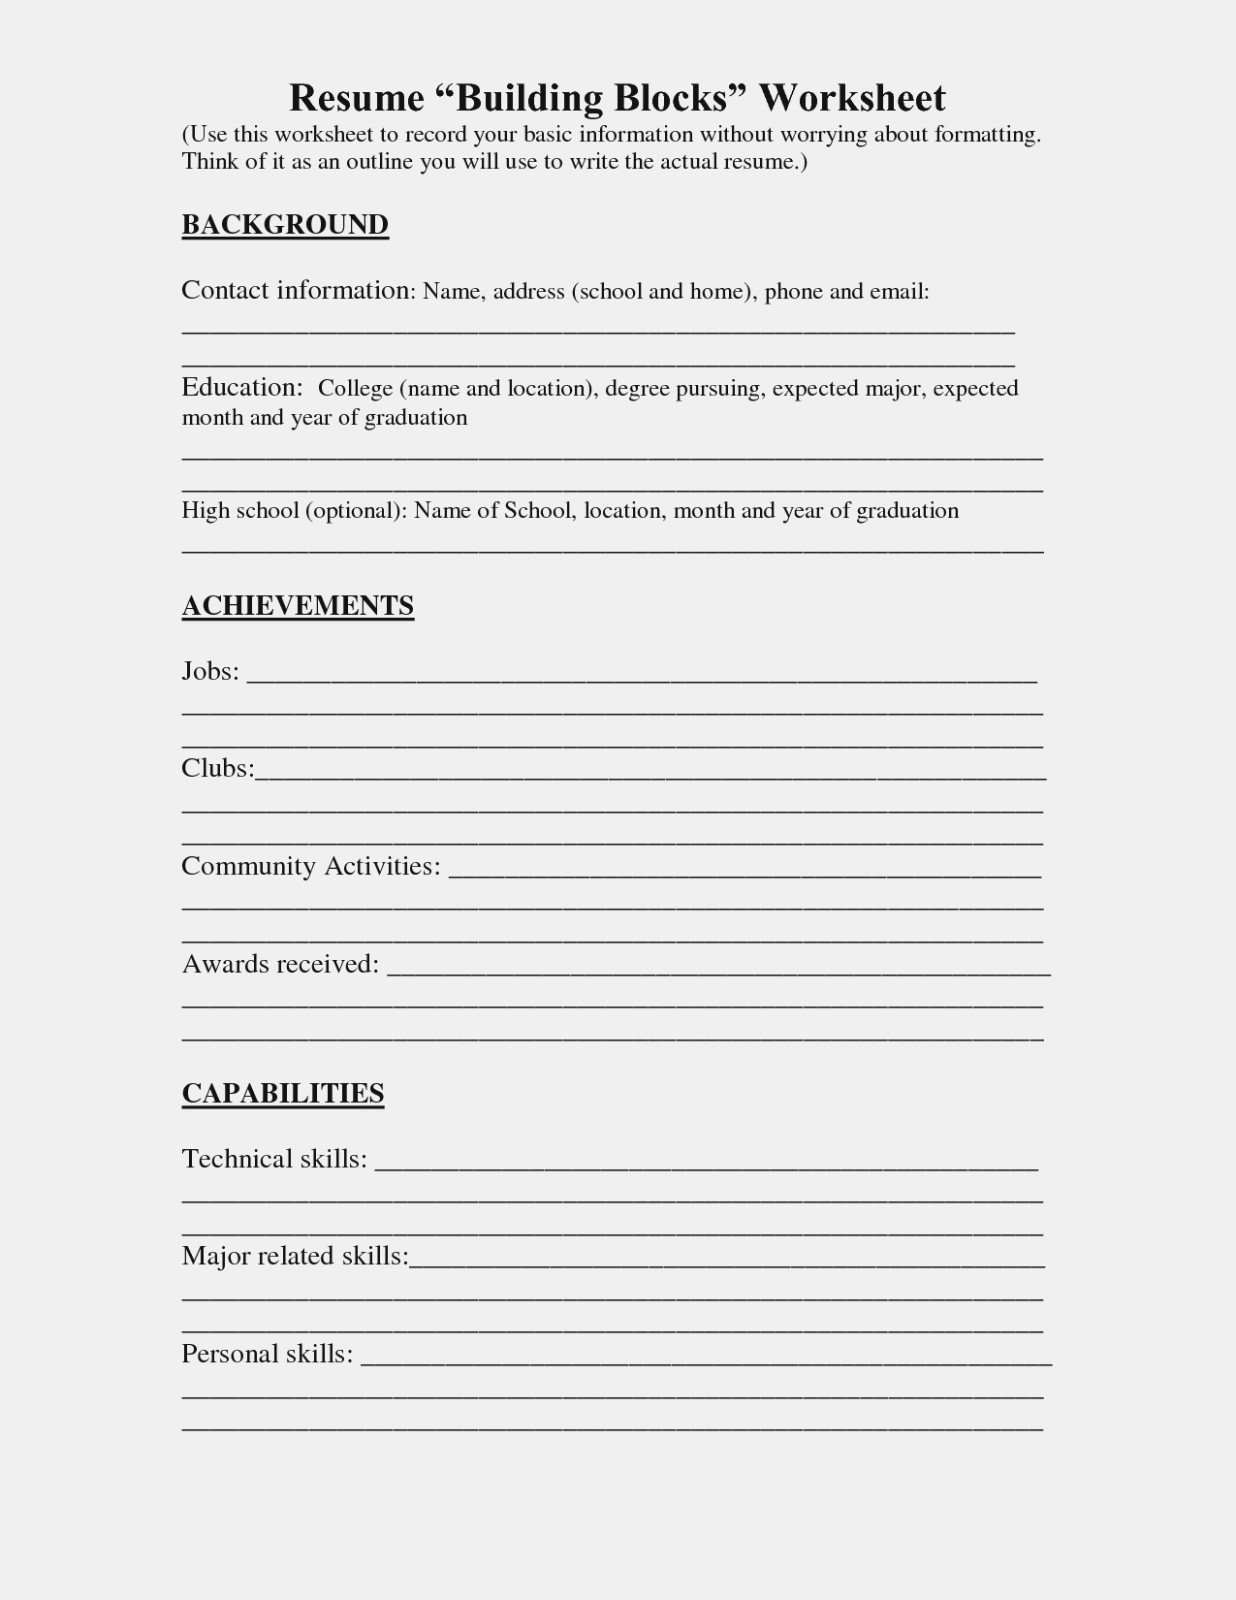 Resume Worksheet Printable Spectacular Cover Letter Worksheet For Together With Cover Letter Worksheet For High School Students